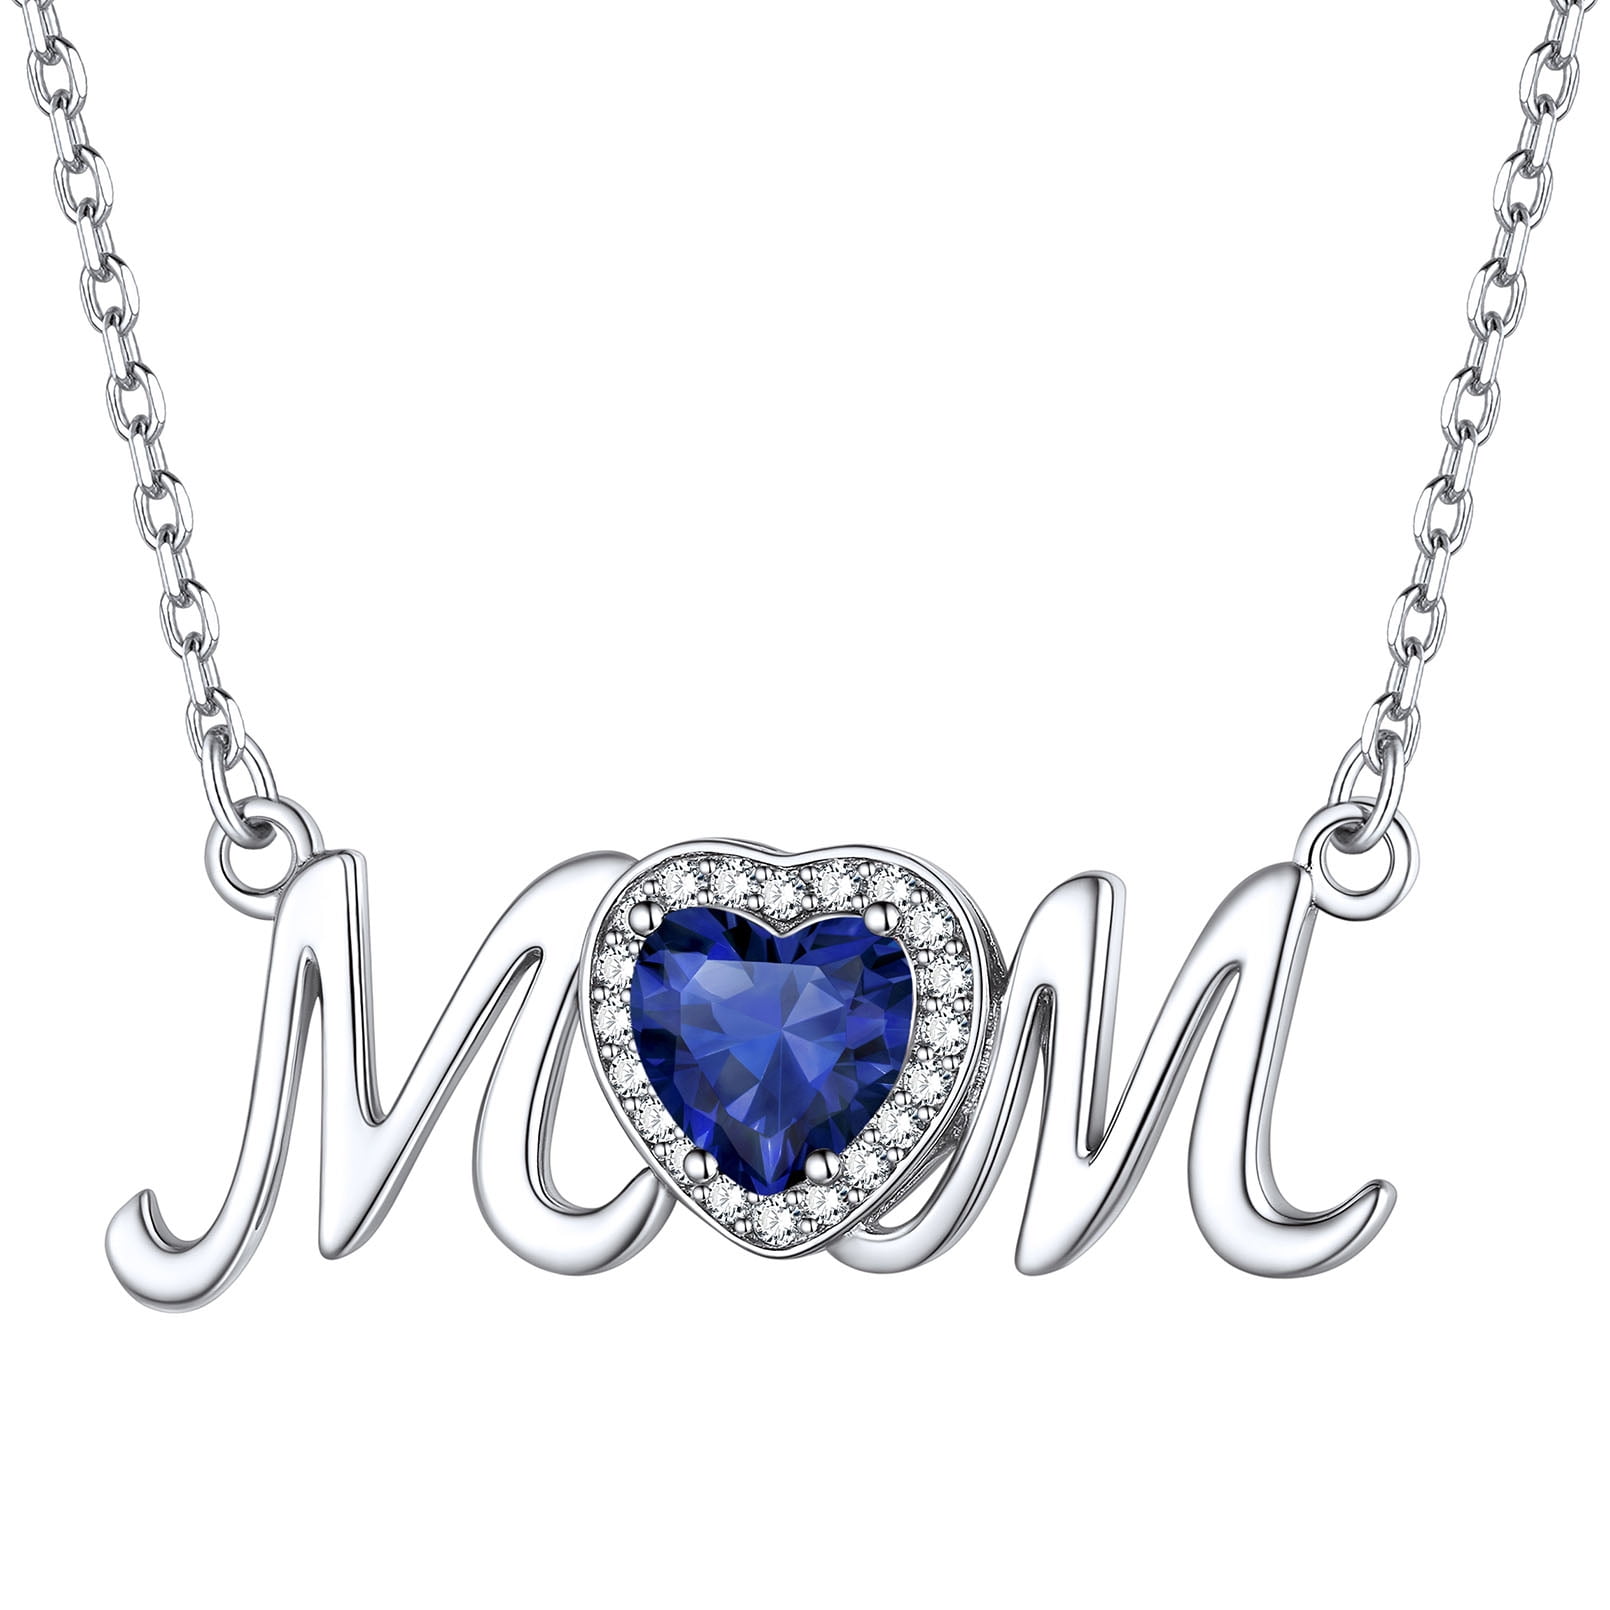 ChicSilver September Created Sapphire Birthstone Heart Necklace for Mom  Grandma, Shiny CZ Sterling Silver Pendant Necklace Birthday Mother Day Gift